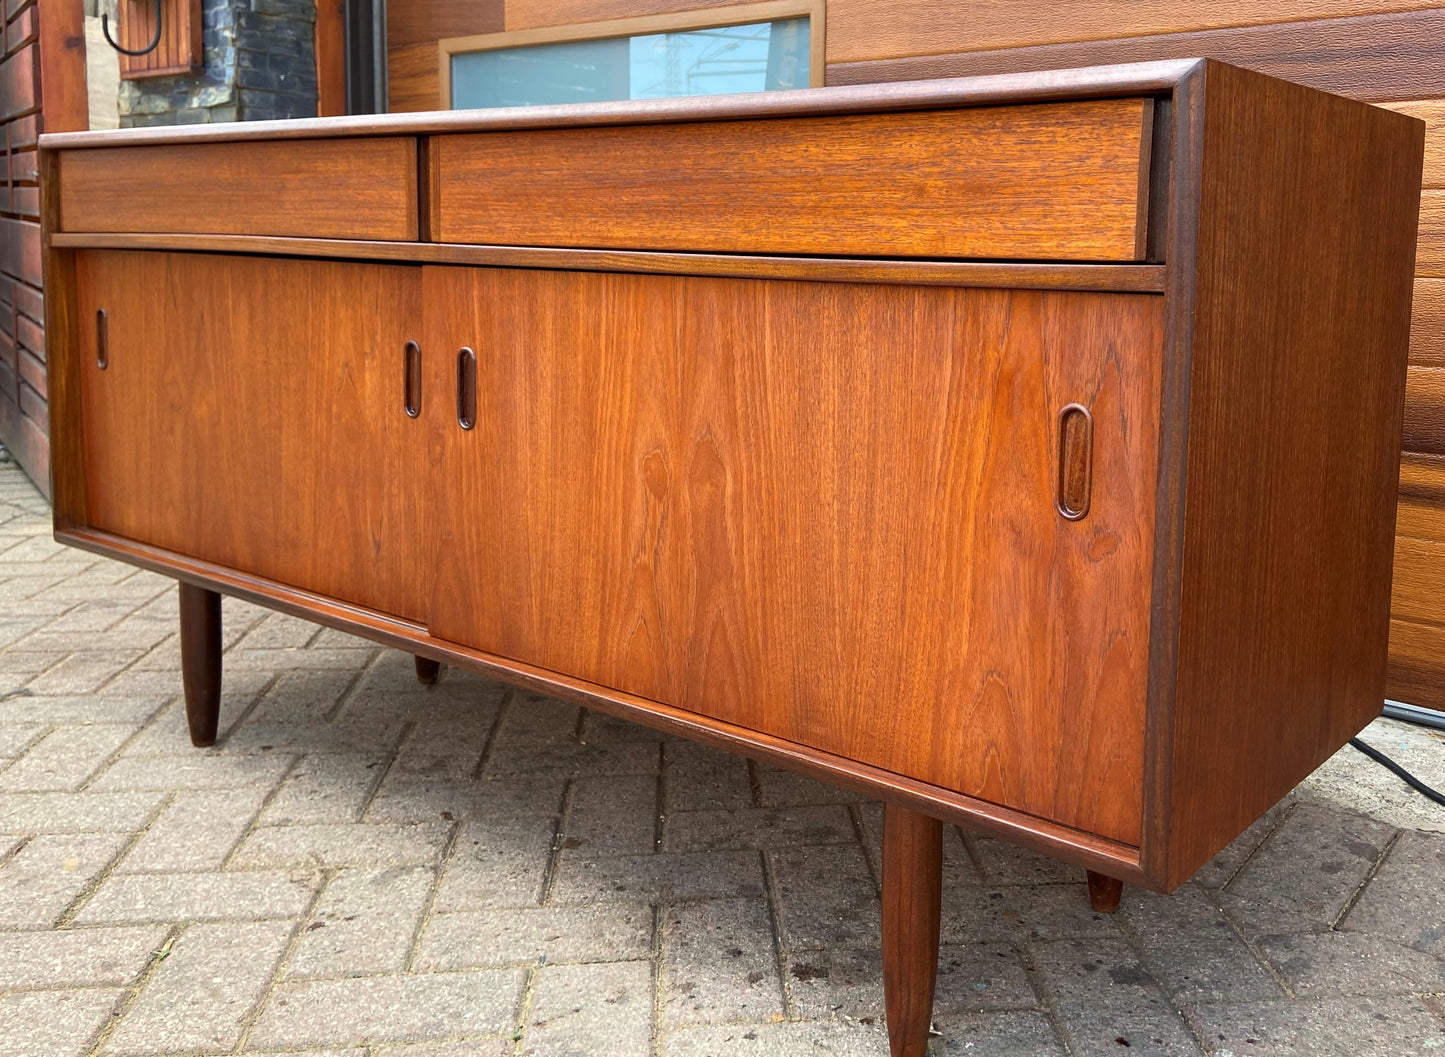 REFINISHED Mid Century Modern Teak Sideboard by Punch Design 60"